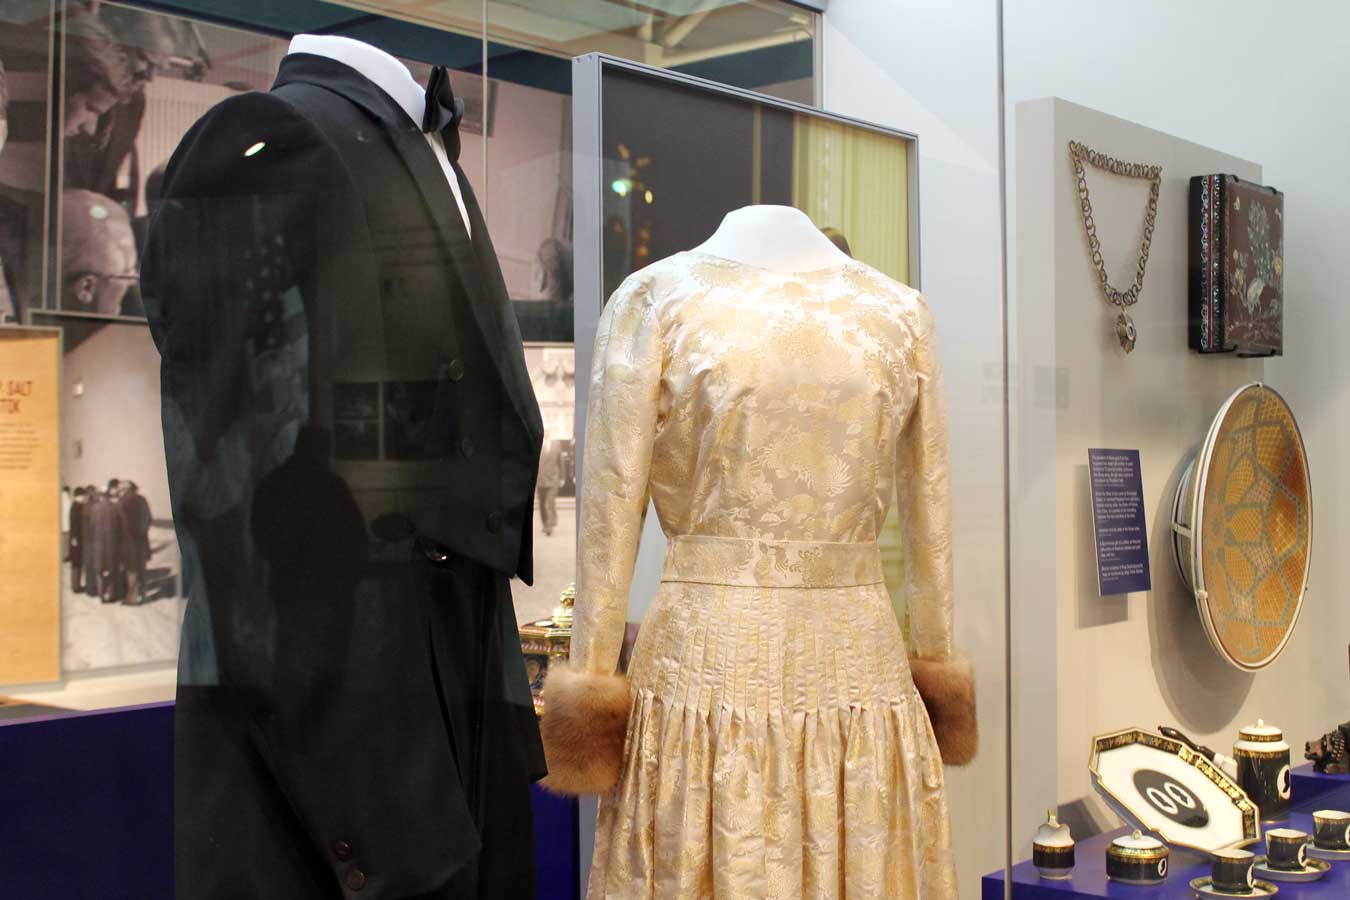 Banquet Attire Worn By Gerald Ford & Betty Ford - See in person at the Gerald R. Ford Presidential Museum in Grand Rapids, Michigan /// Gerald R. Ford Presidential Museum: Legacy Of An Unelected President - (via Wading in Big Shoes)